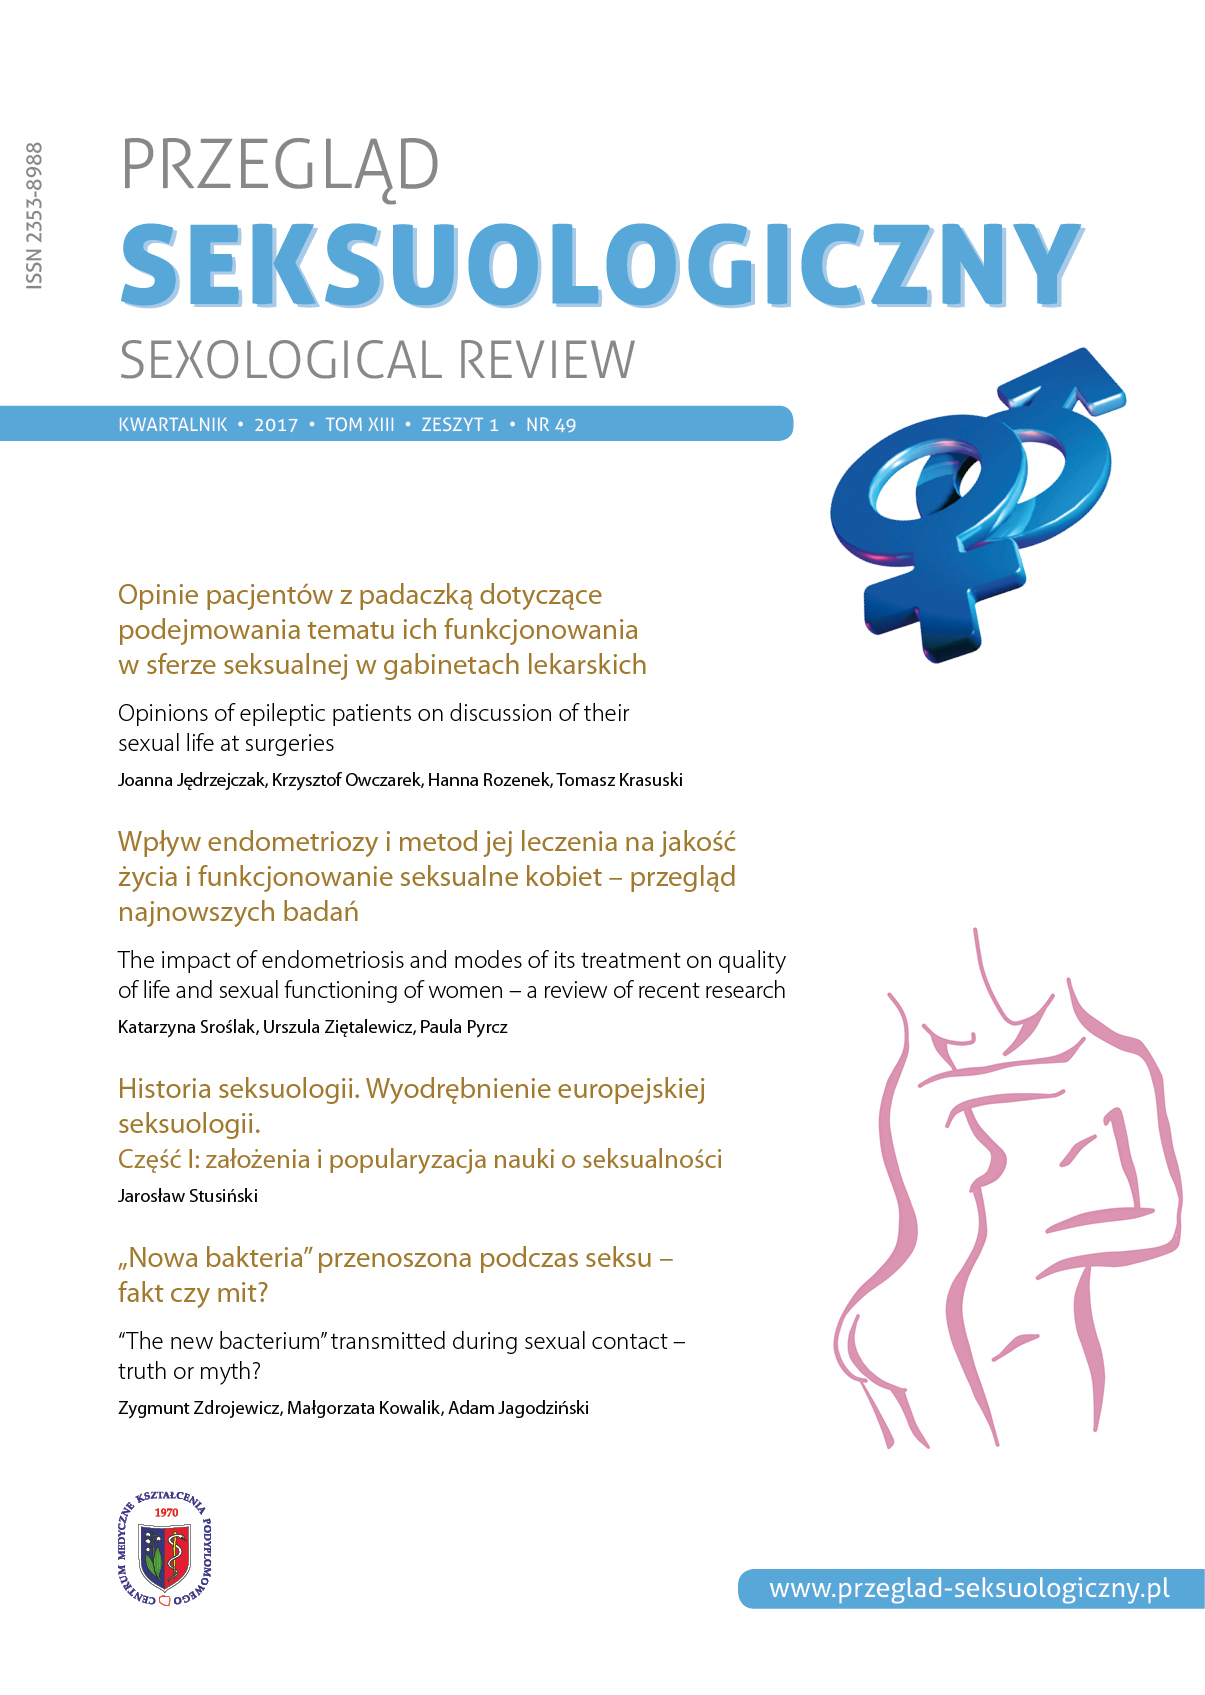 Opinions of epileptic patients on discussion of their sexual life at surgeries. Cover Image